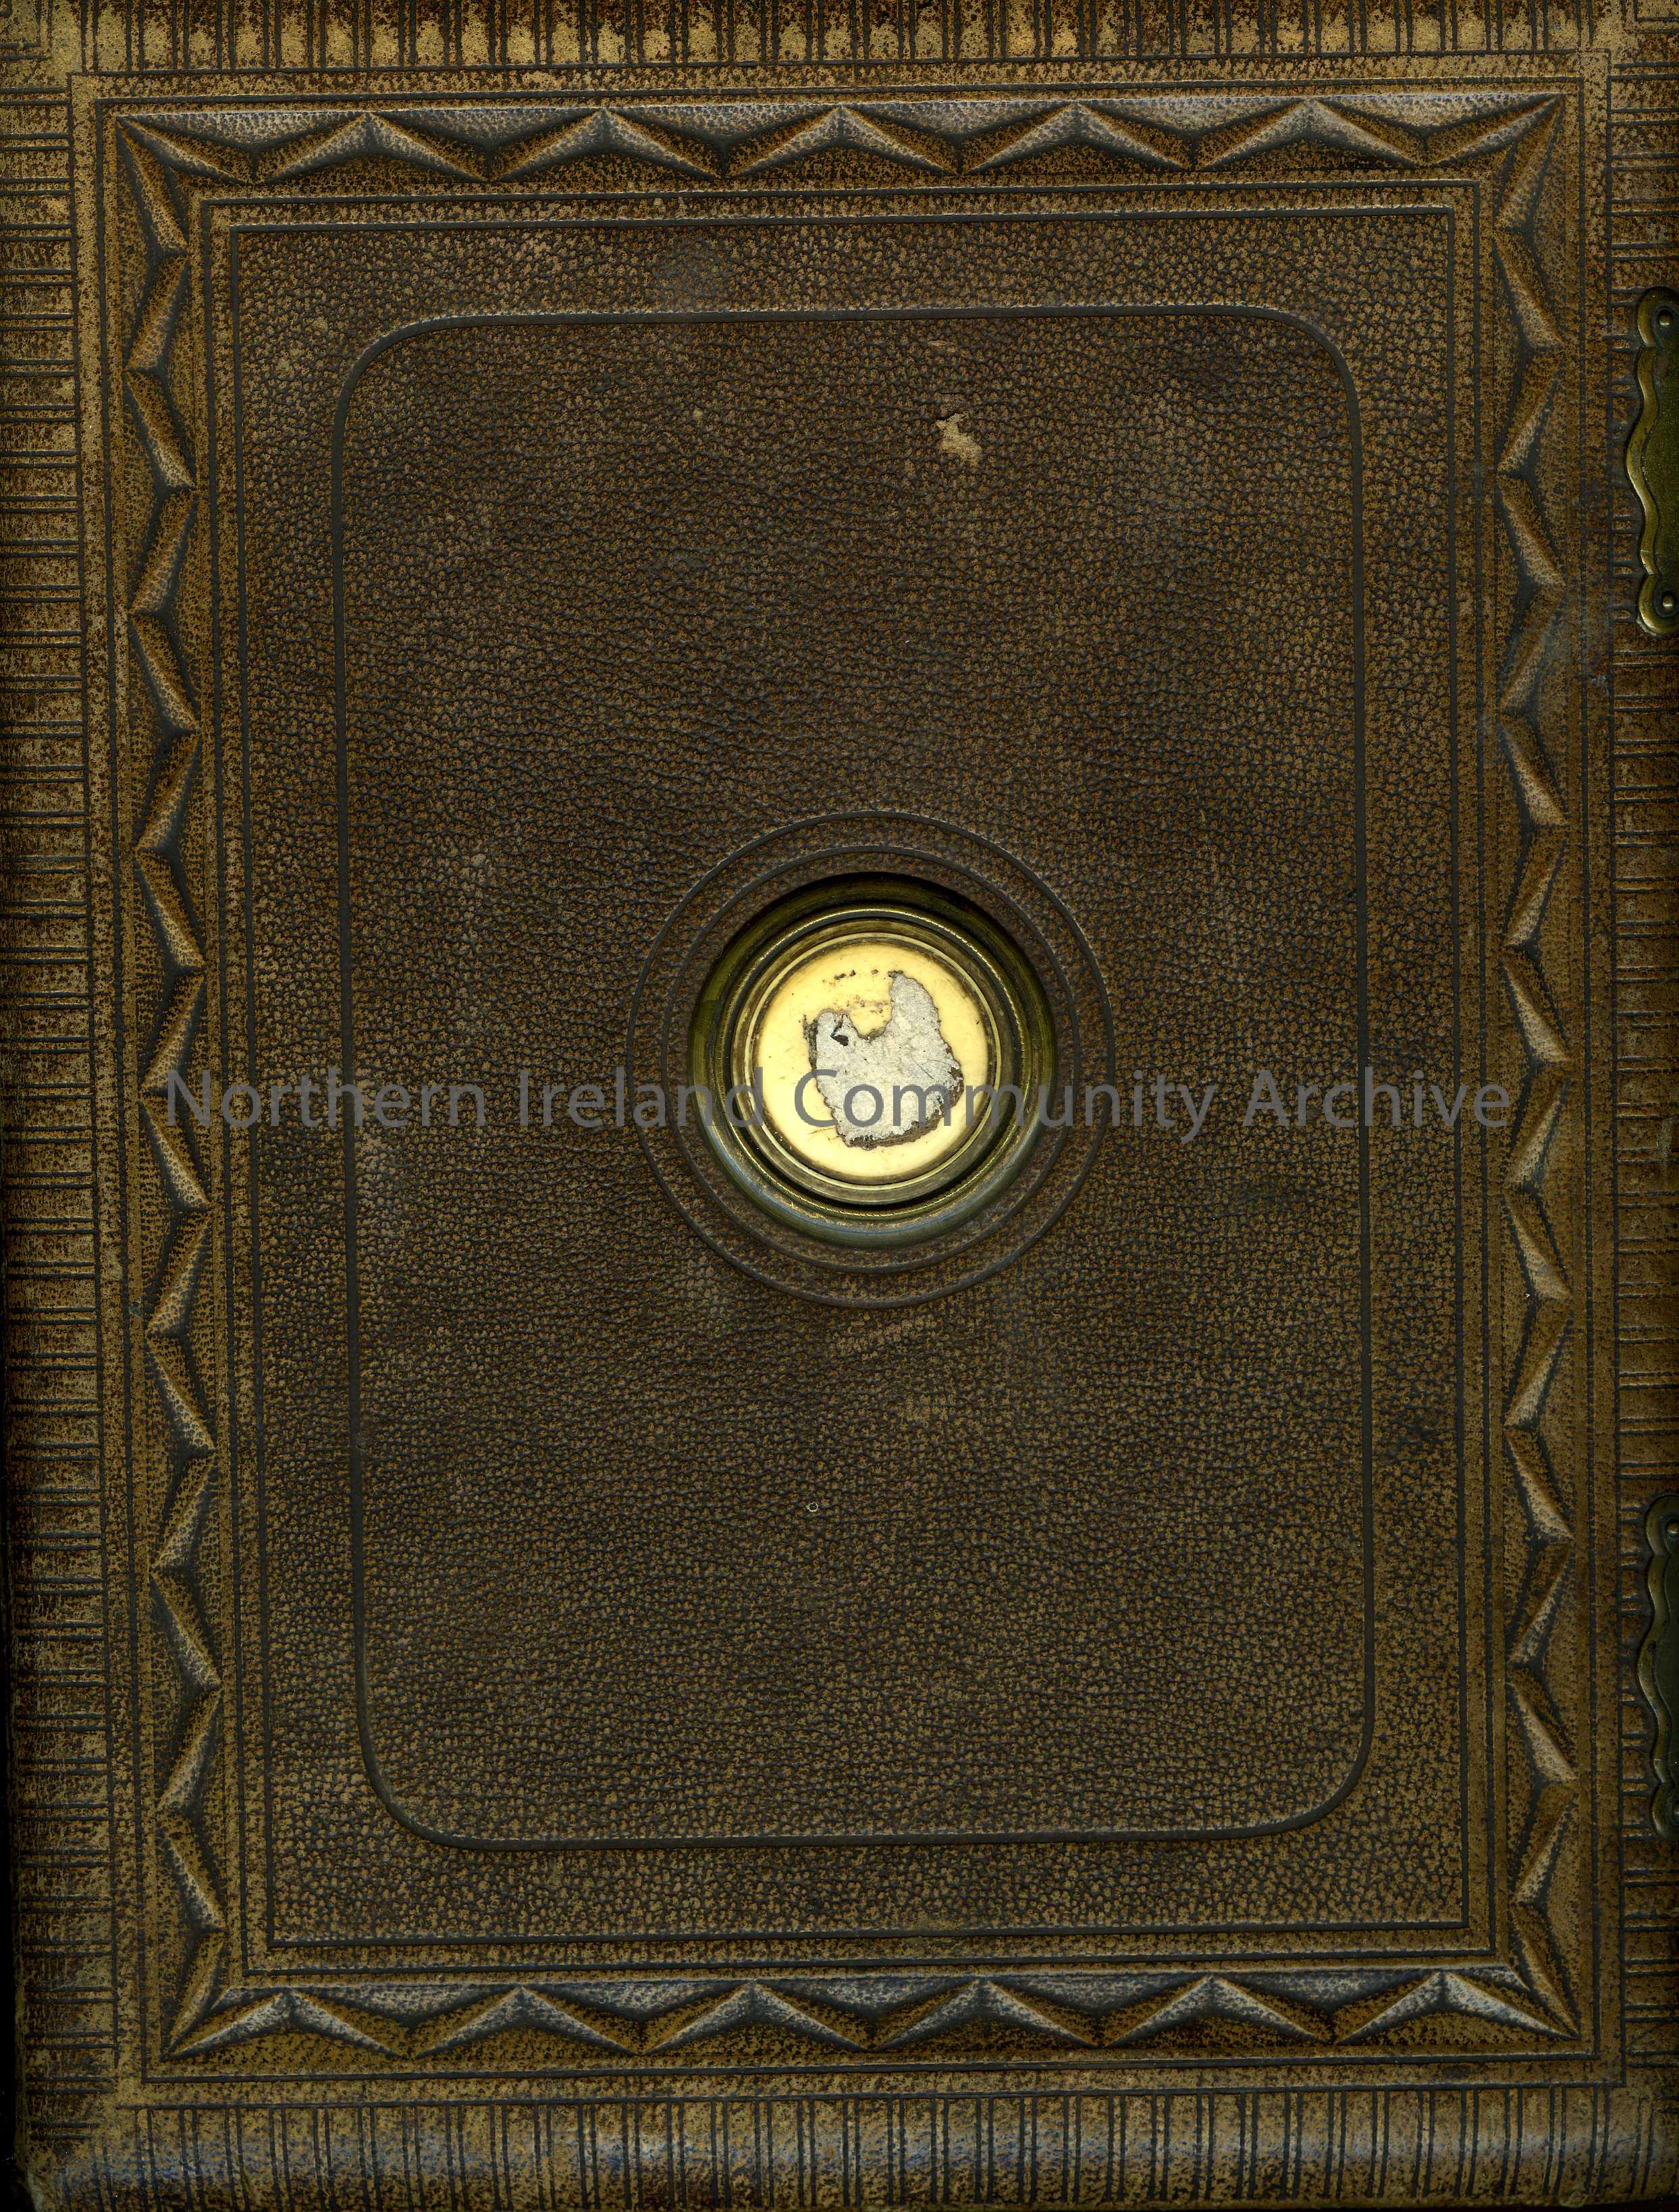 photograph album depicting the family of Brown from Portstewart (5705)